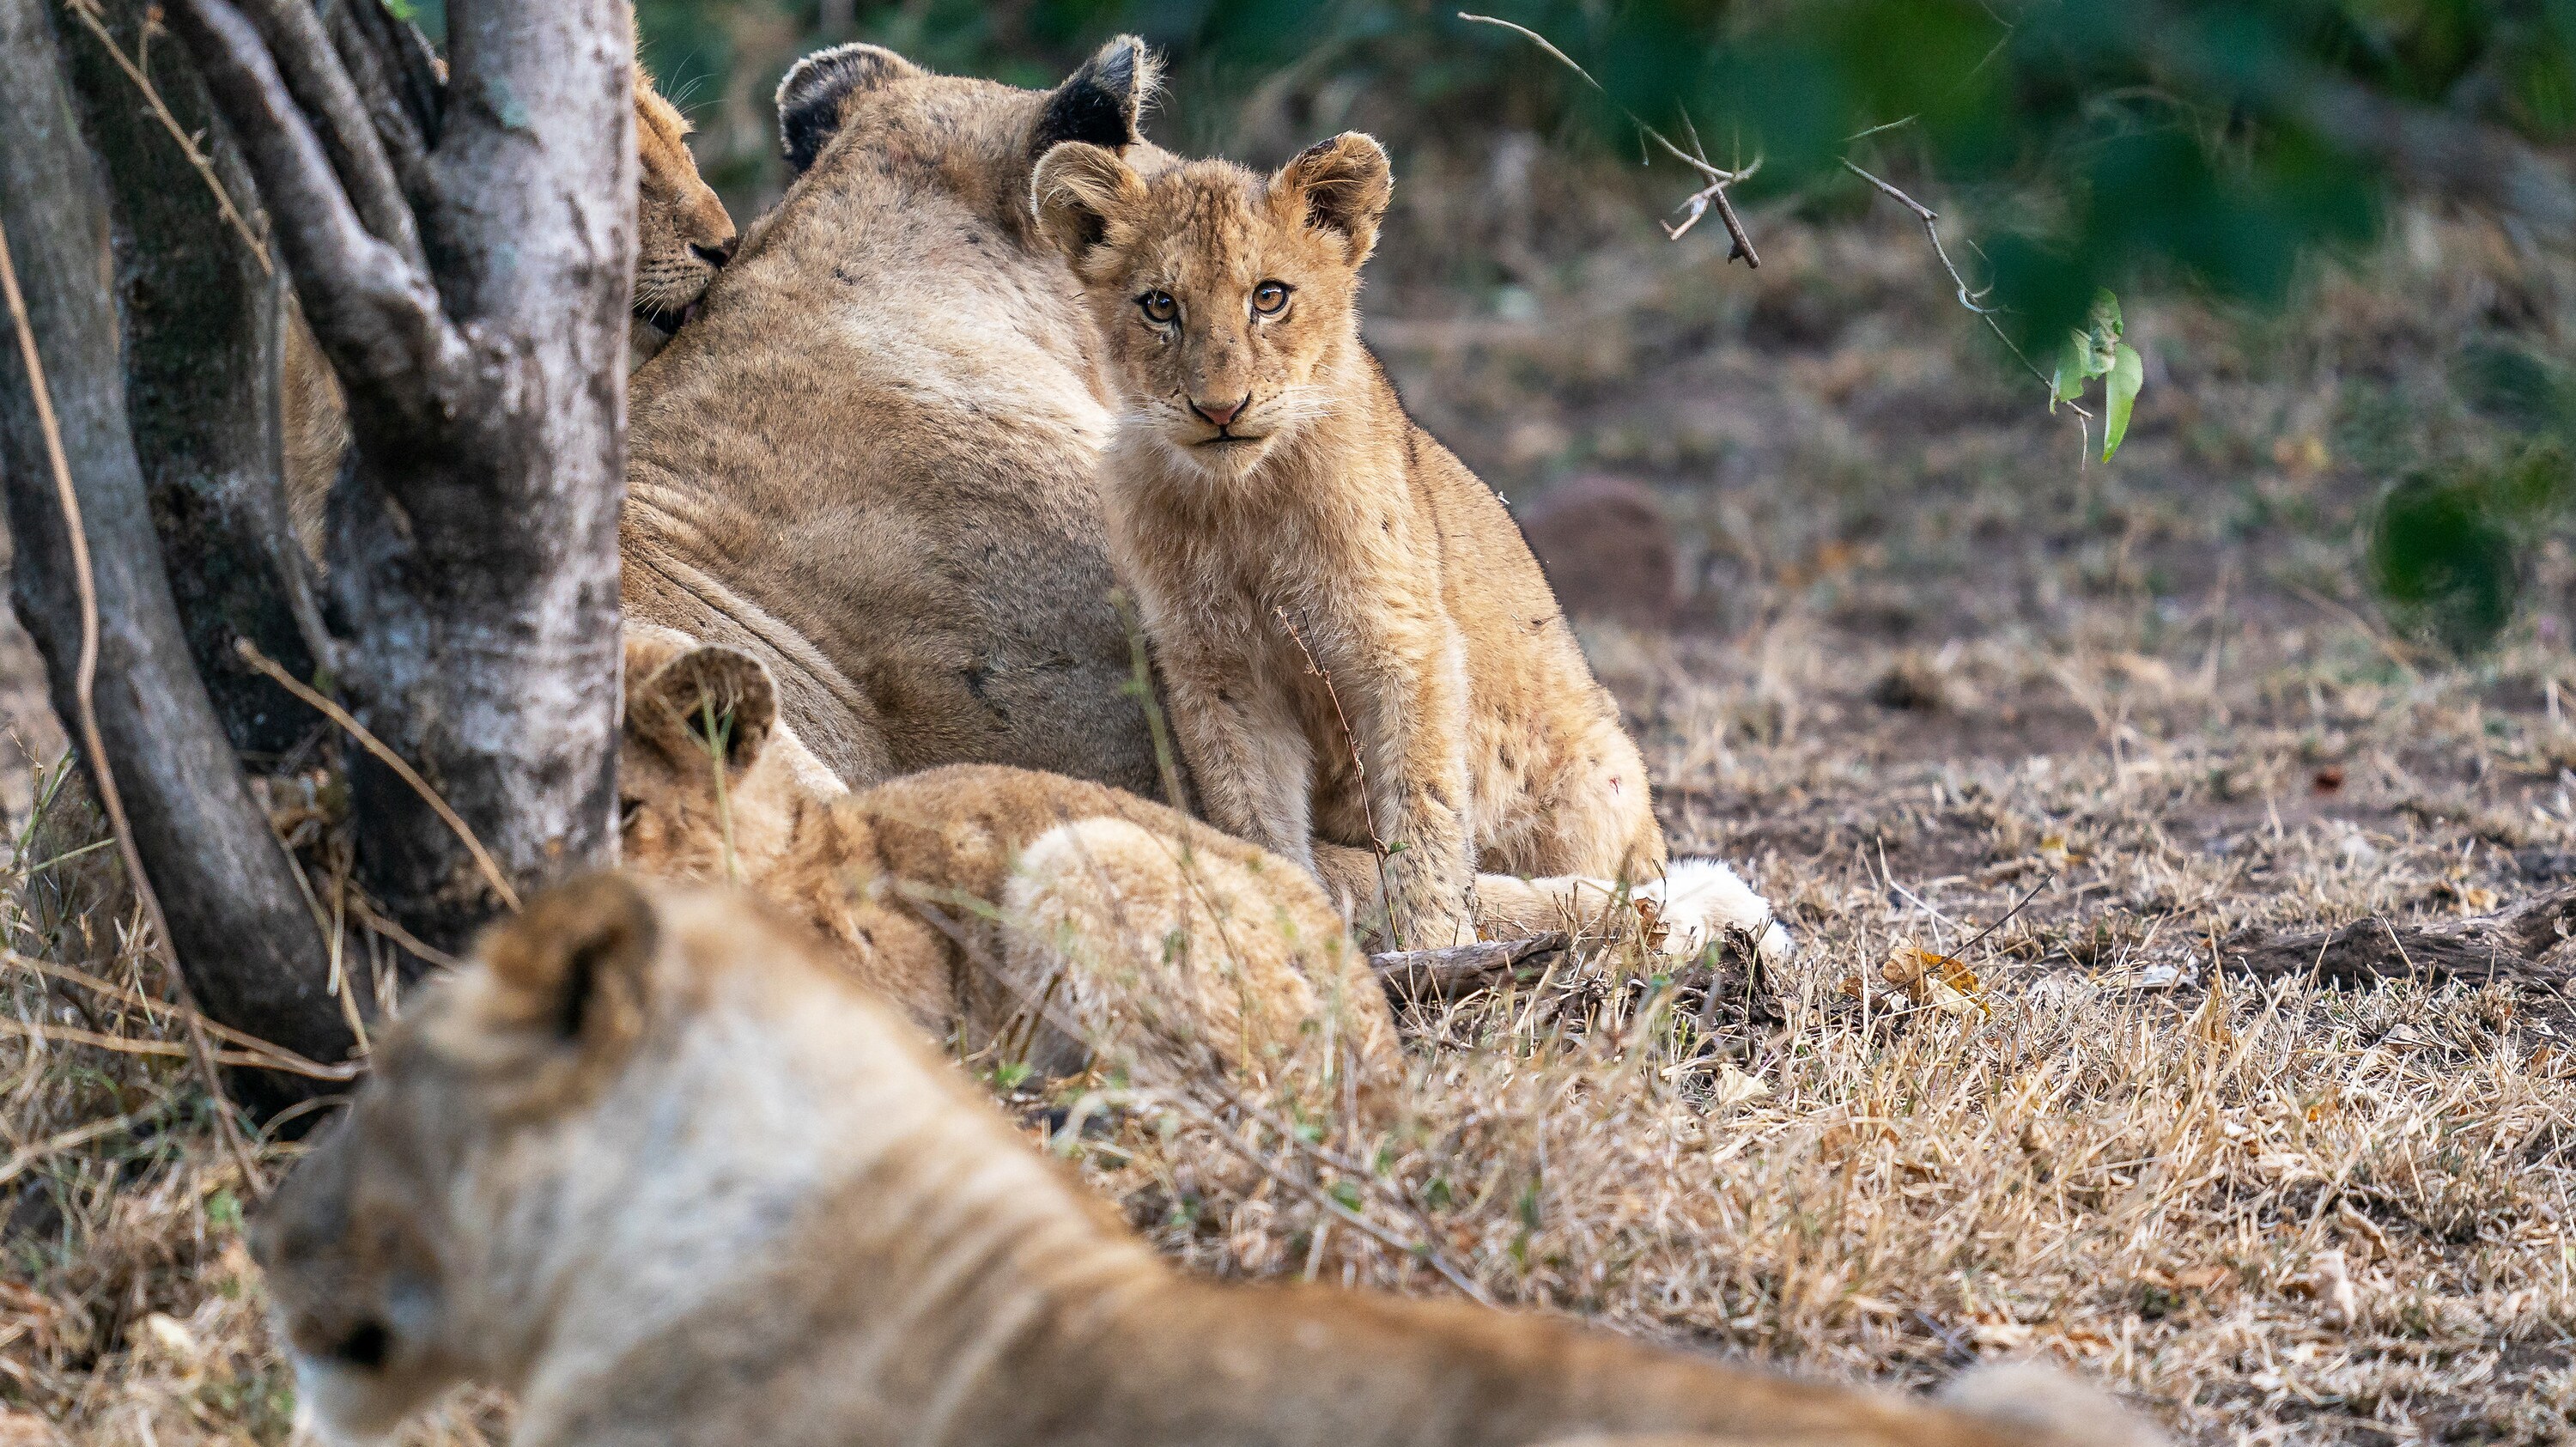 Cub Issa surrounded by her family. (National Geographic for Disney+/Russell MacLaughlin)